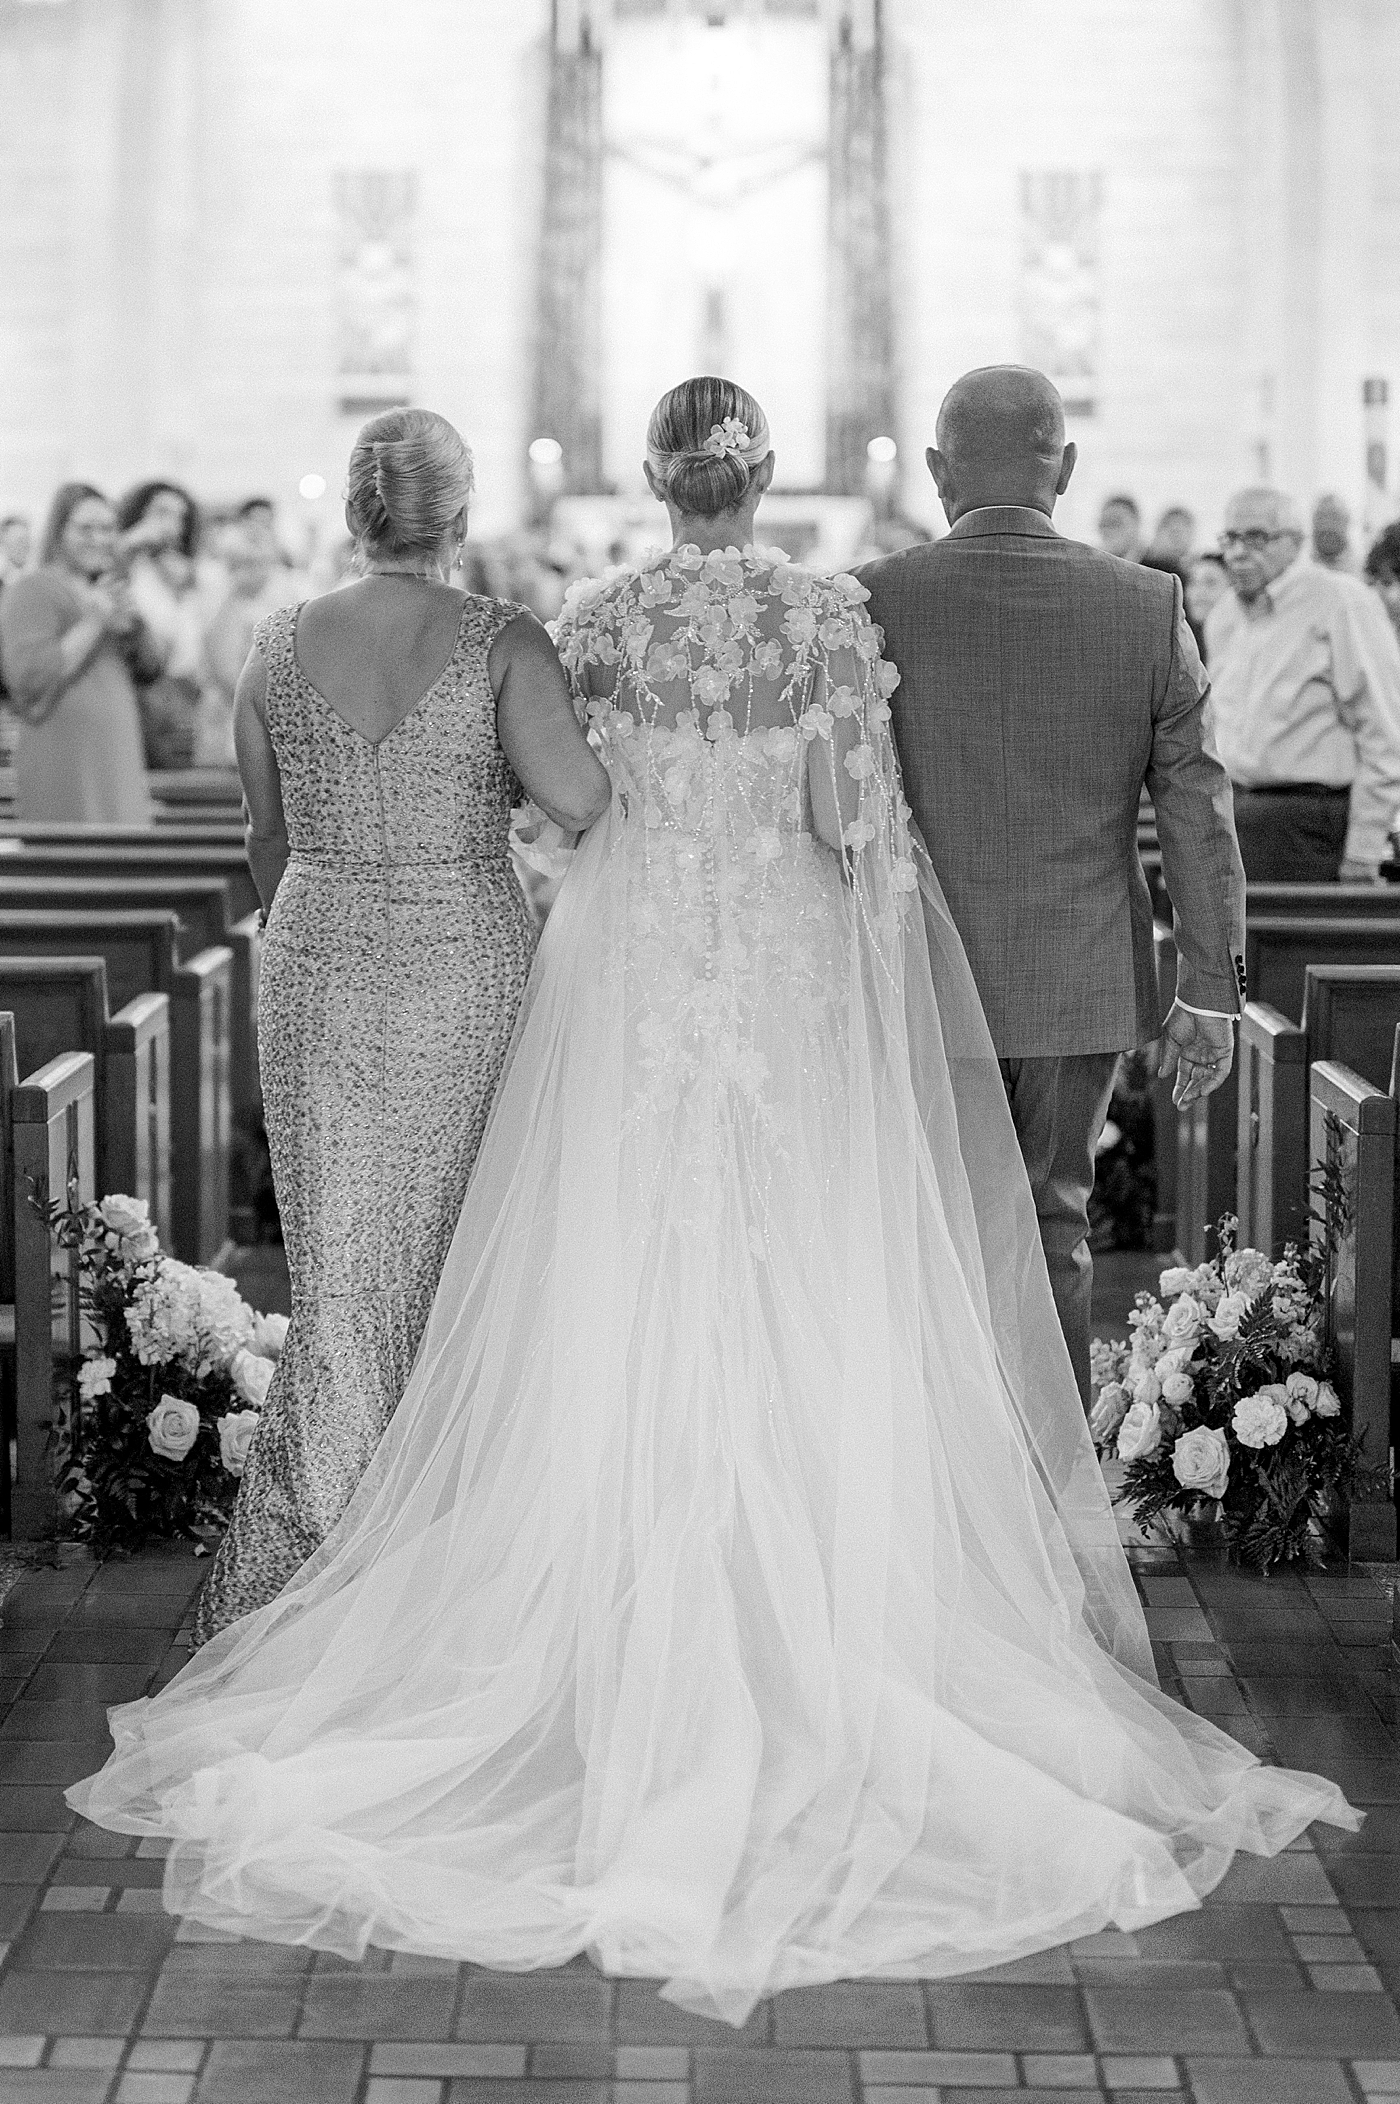 Black and white image of bride walking down the aisle | Image by Hope Helmuth Photography